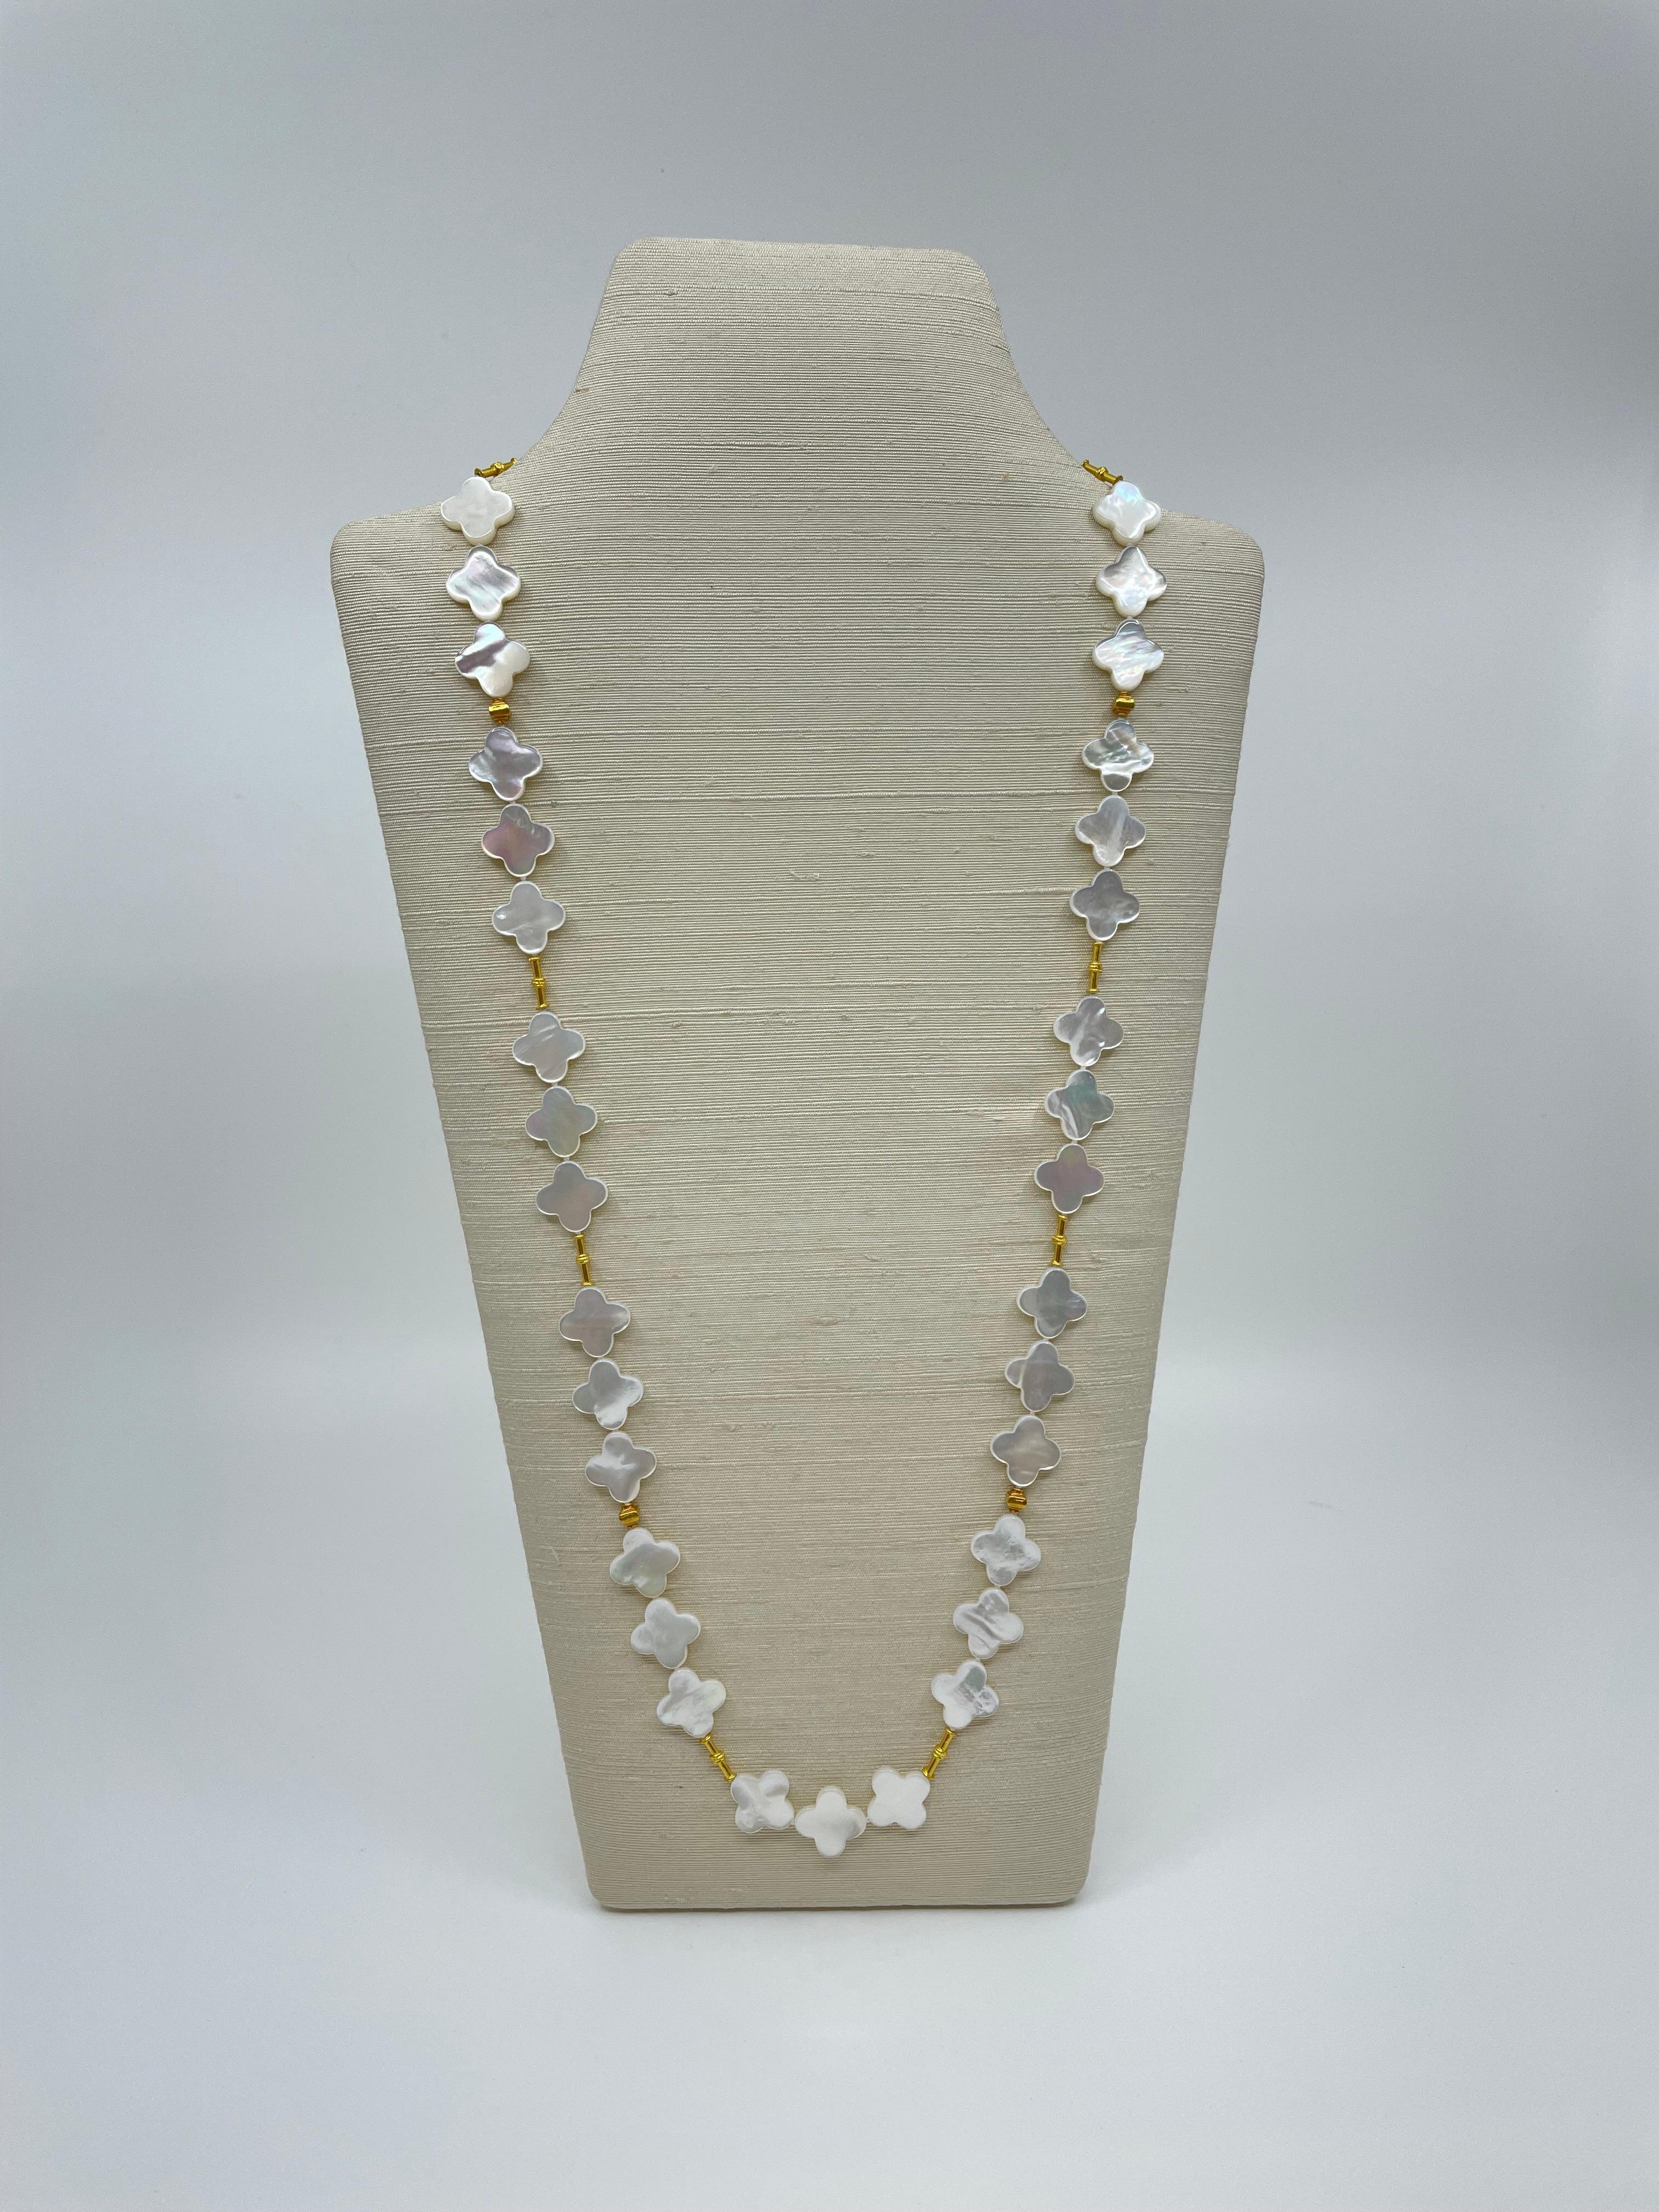 From our Amalfi collection, an exquisite hand-made long necklace with mother-of-pearl quatrefoil beads, spaced by 18K gold faceted and tube-shaped beads, stunning for all occasions in spring and summer.

The Amalfi Collection
Evoking the wonderful